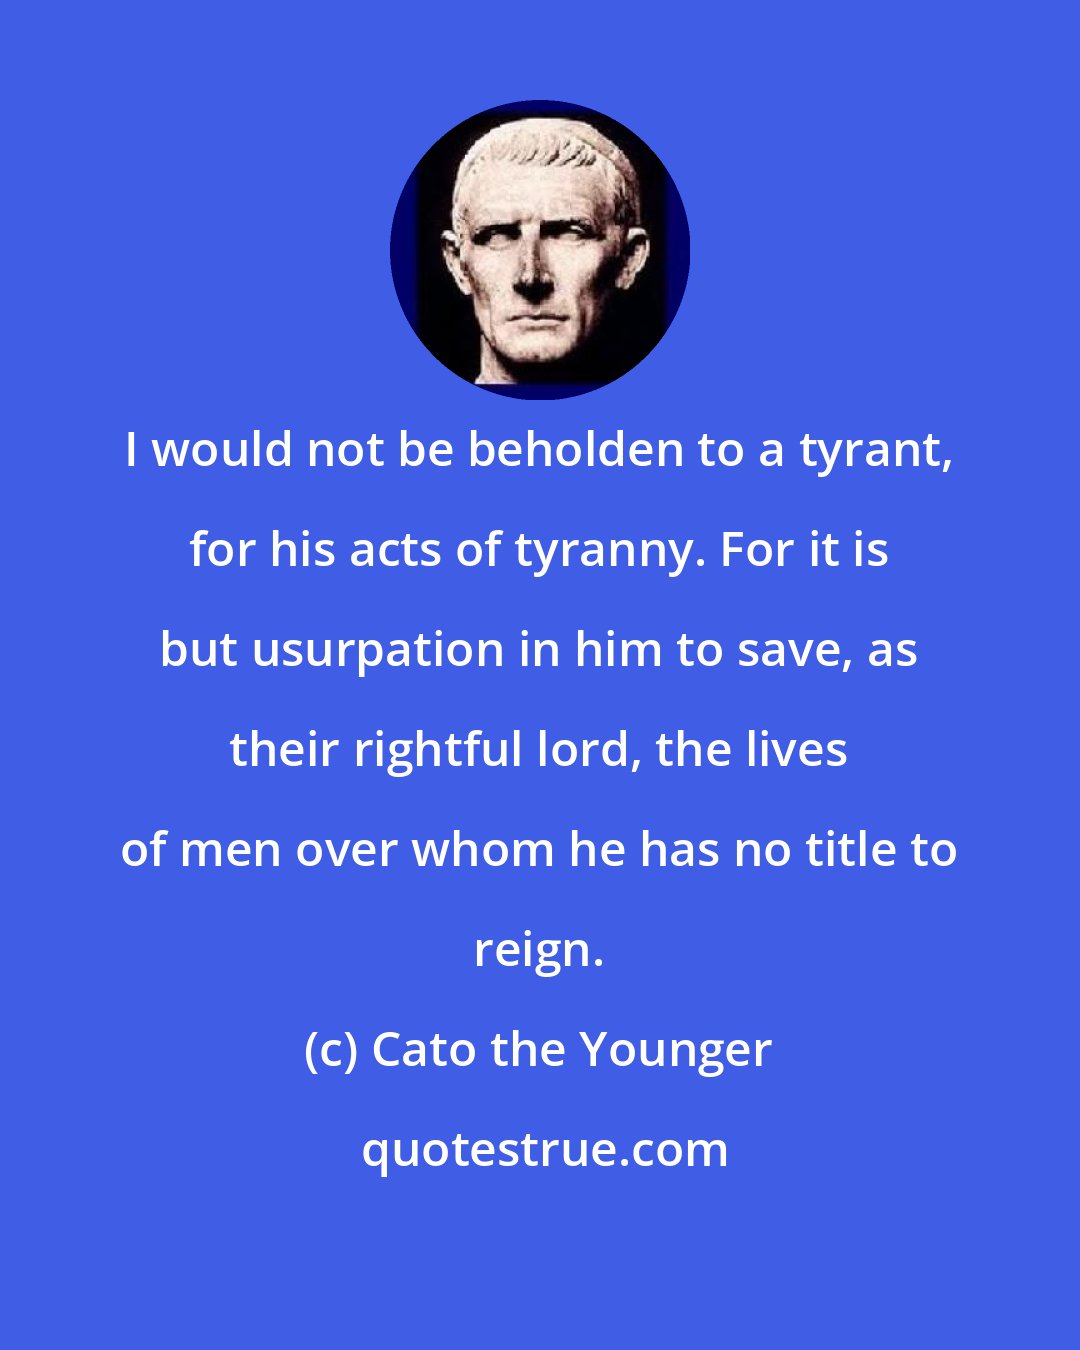 Cato the Younger: I would not be beholden to a tyrant, for his acts of tyranny. For it is but usurpation in him to save, as their rightful lord, the lives of men over whom he has no title to reign.